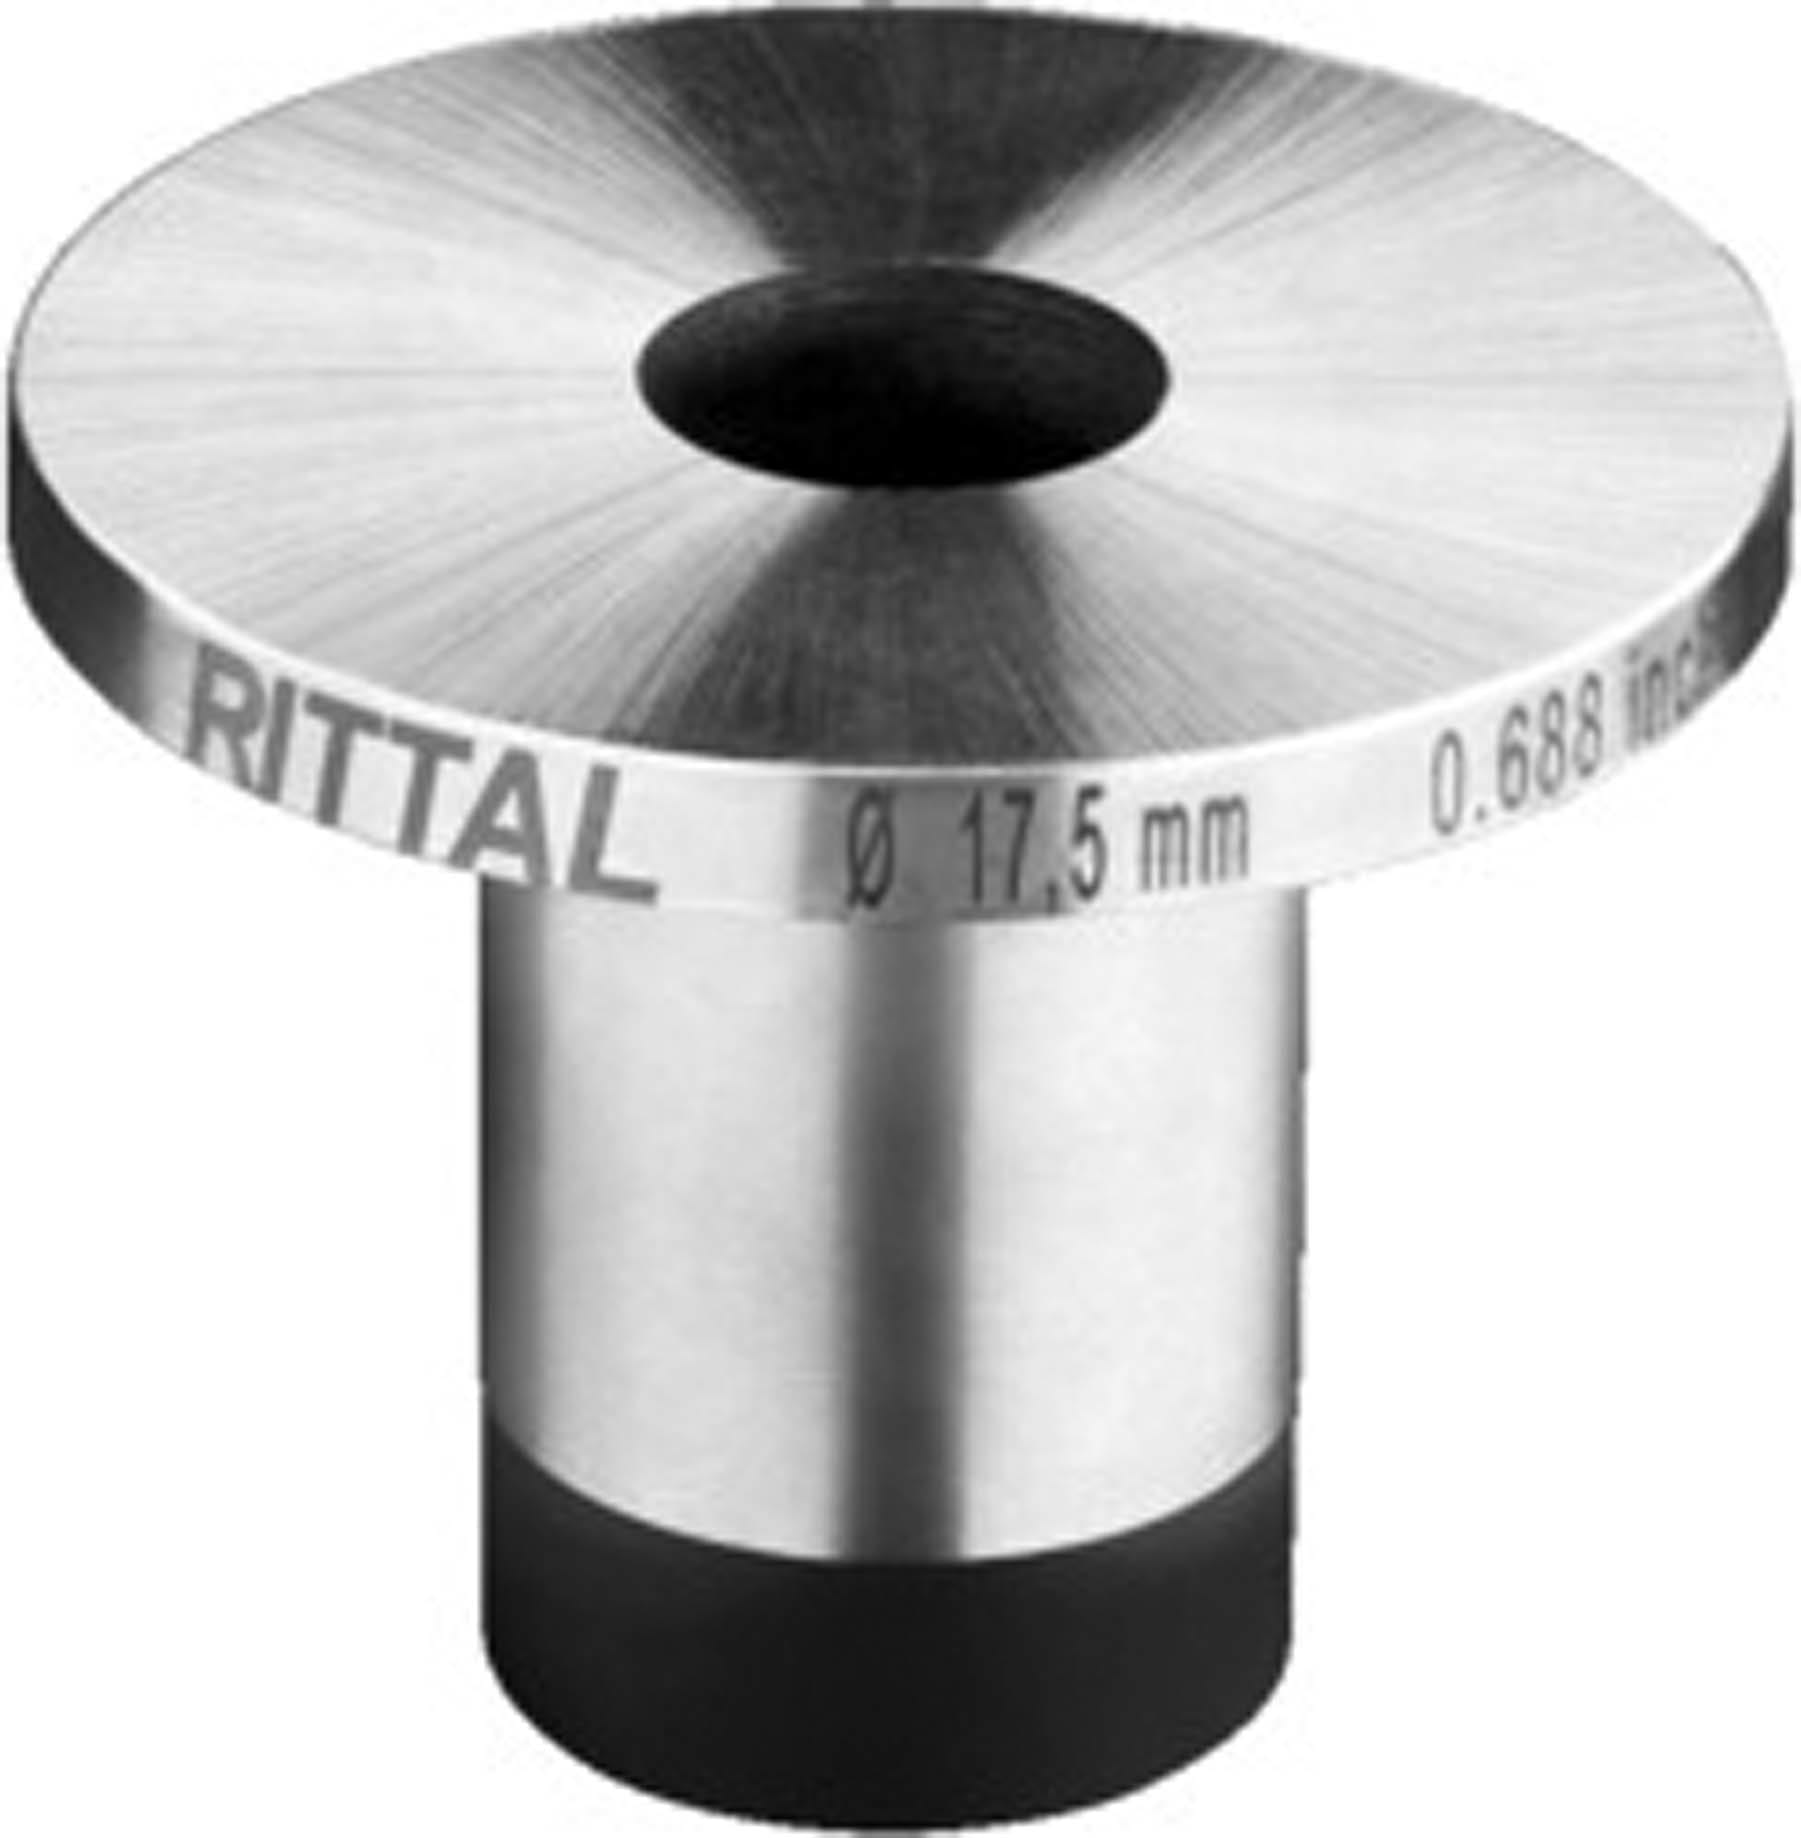 Rittal - Matrice ronde 17,5 mm gamme automation systems